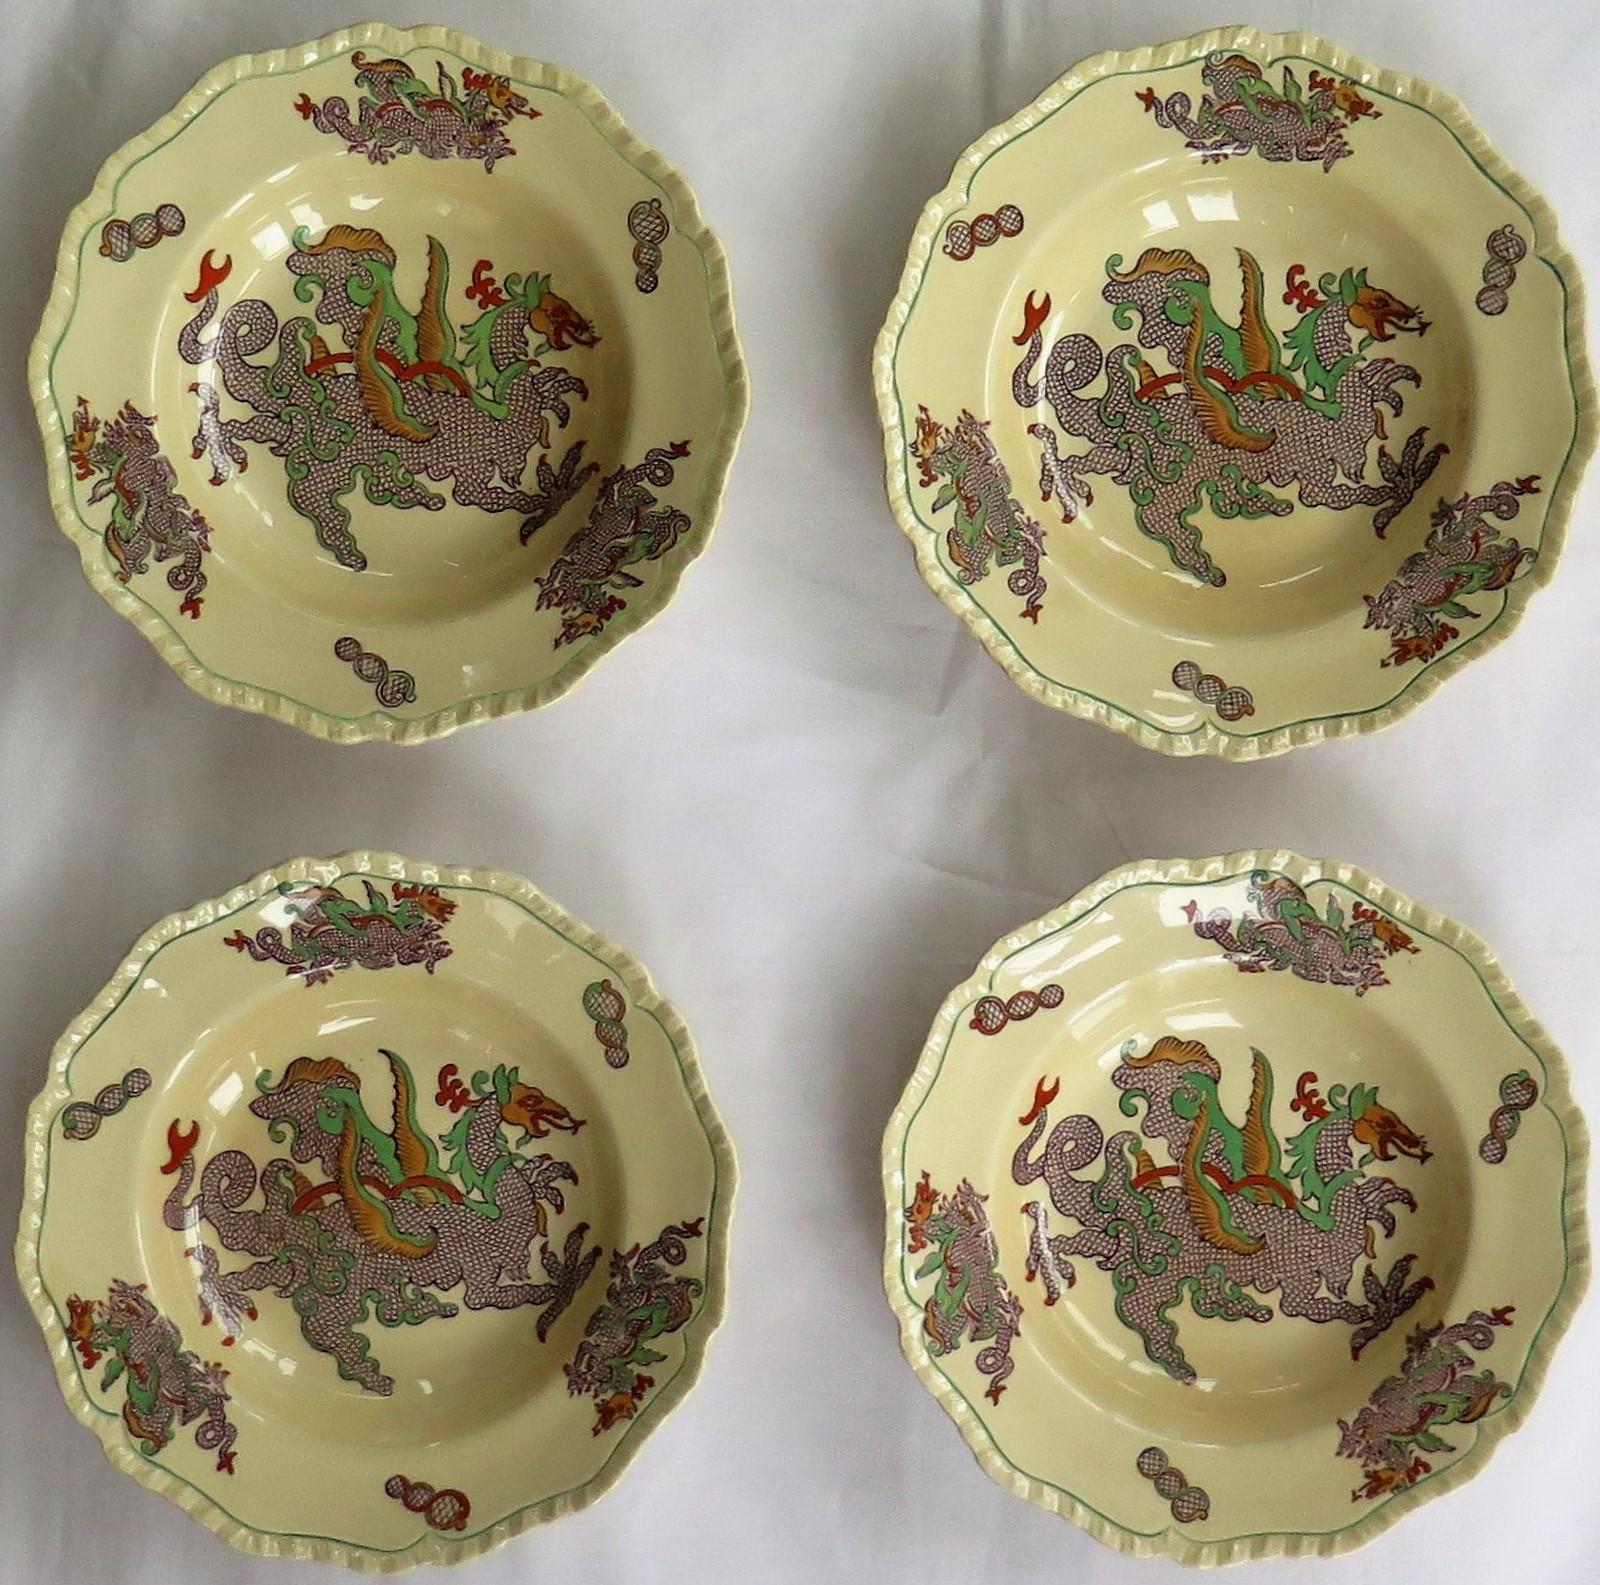 This is a lovely set of FOUR bowls or deep plates by Mason's Ironstone, England in the Chinese Dragon pattern, dating to the late 19th century, circa 1900.

The plates or bowls are circular in shape with a wavy molded edge.

The bowls are all